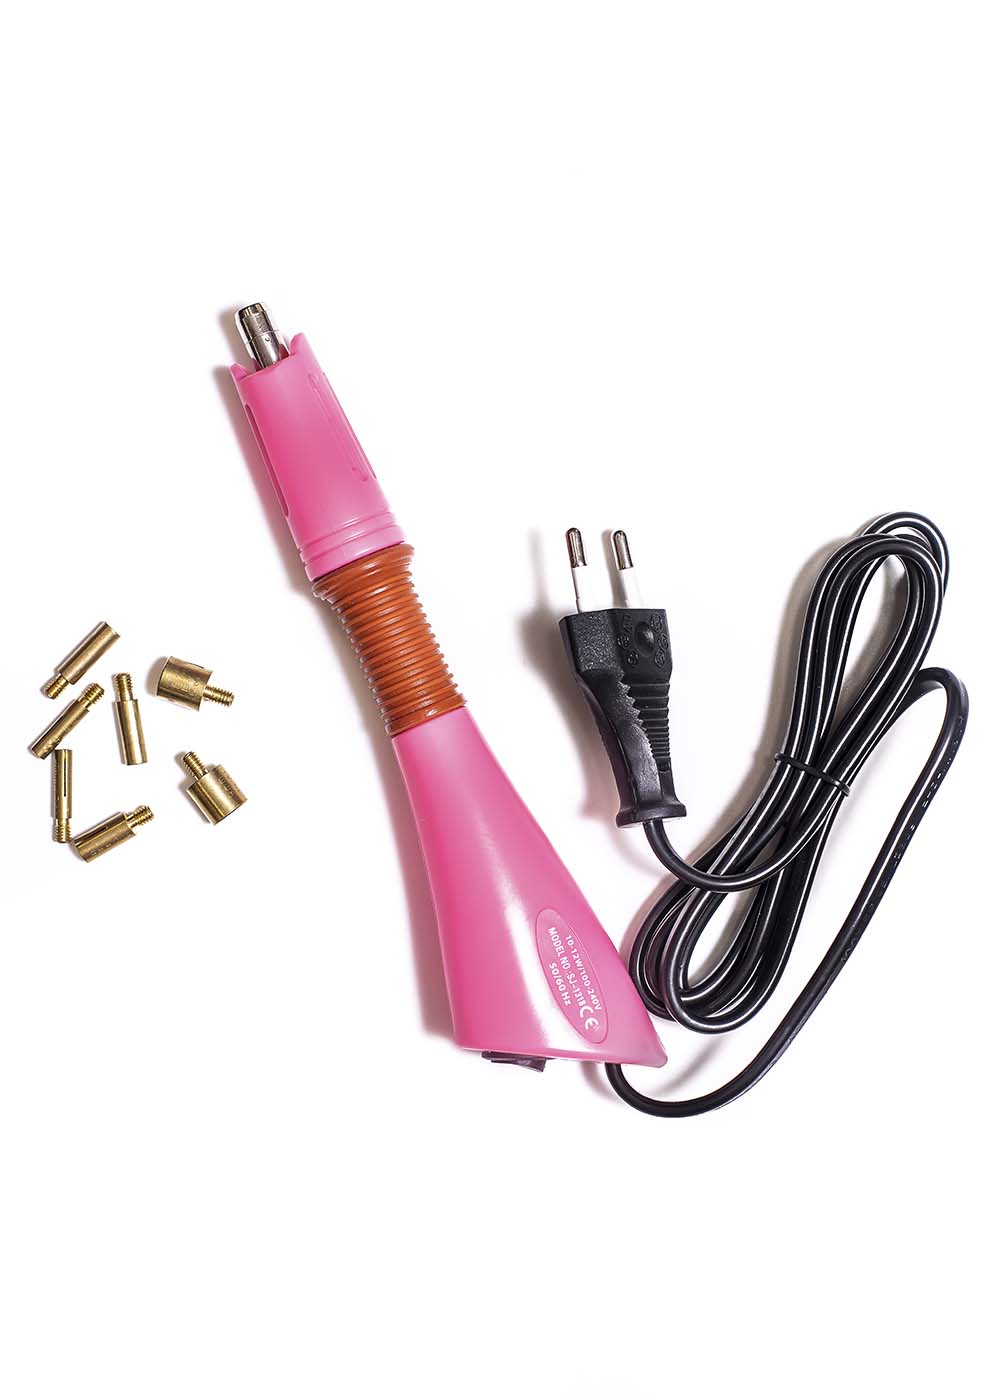 soldering iron for rhinestones to buy at the Grand Prix store